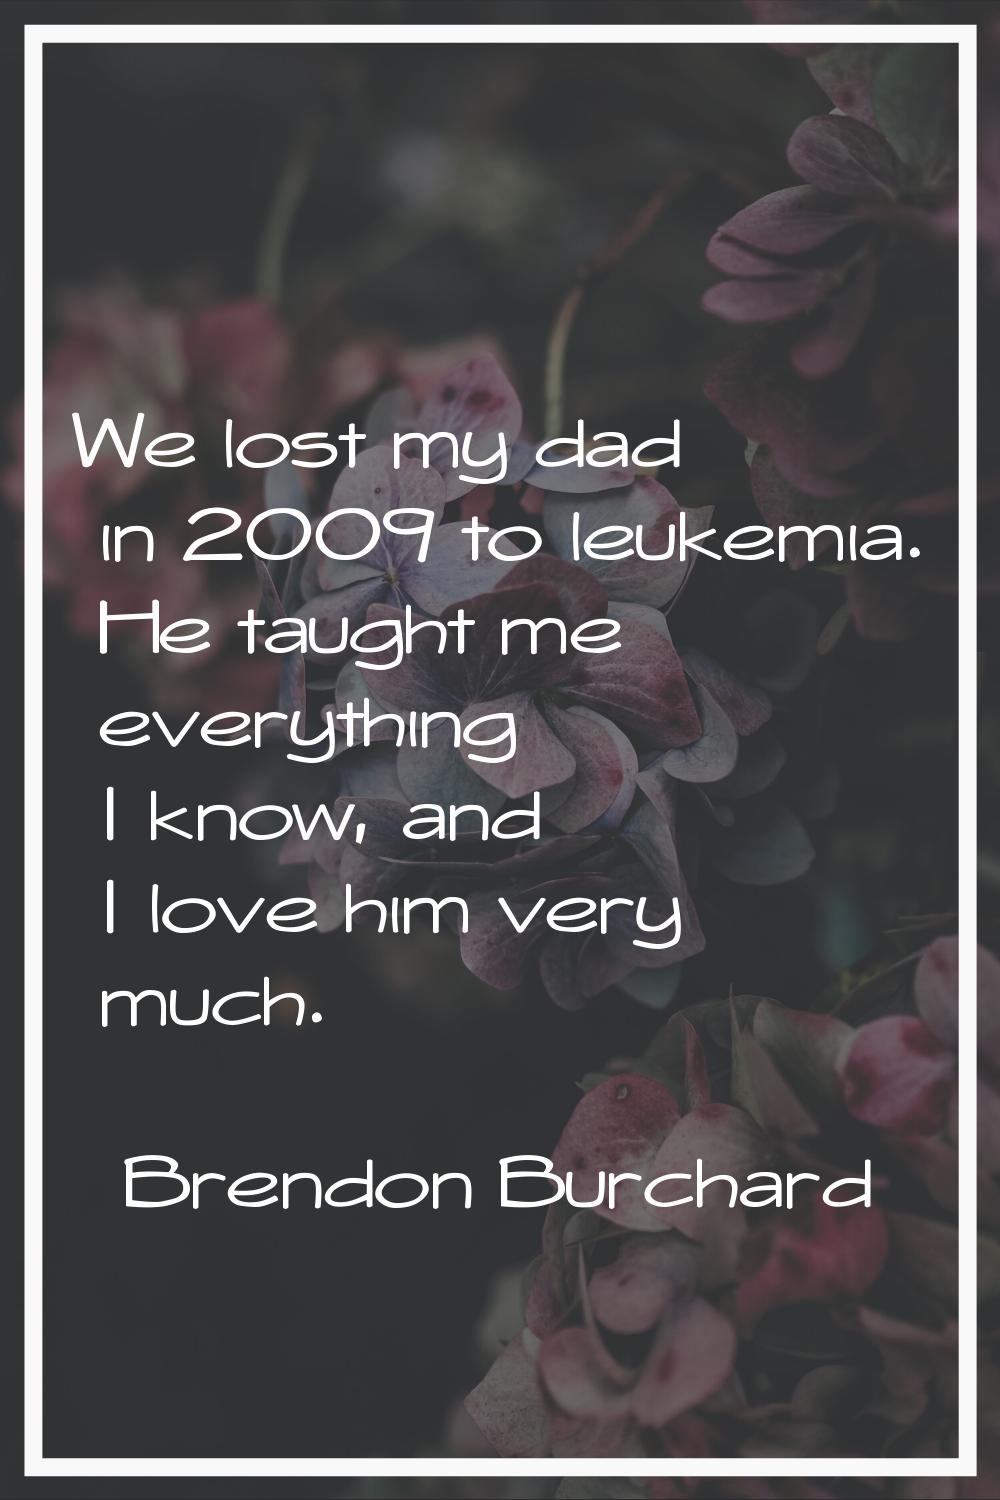 We lost my dad in 2009 to leukemia. He taught me everything I know, and I love him very much.